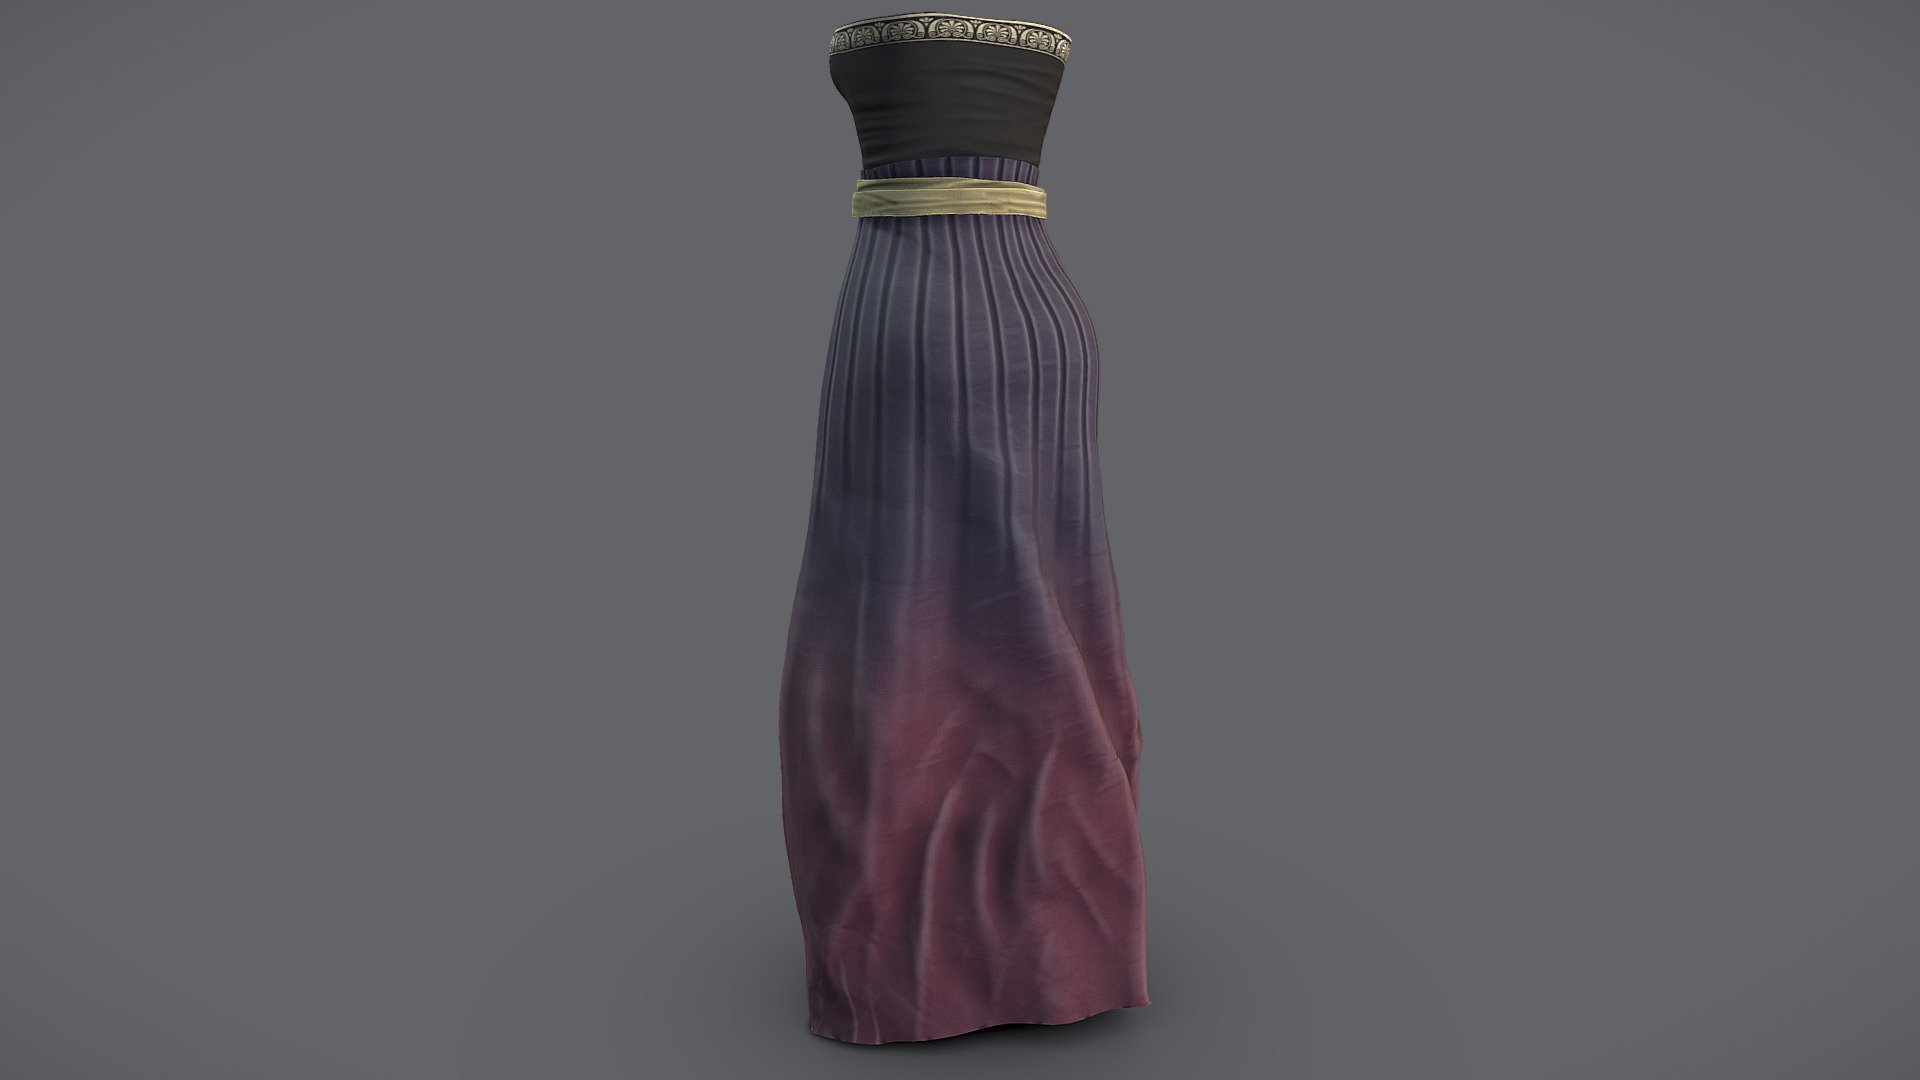 Female Strapless Tube Top Maxi Skirt Combo

Can be fitted to any character

Clean topology

No overlapping smart optimized unwrapped UVs

High-quality realistic textures

FBX, OBJ, gITF, USDZ (request other formats)

PBR or Classic

Type     user:3dia &ldquo;search term